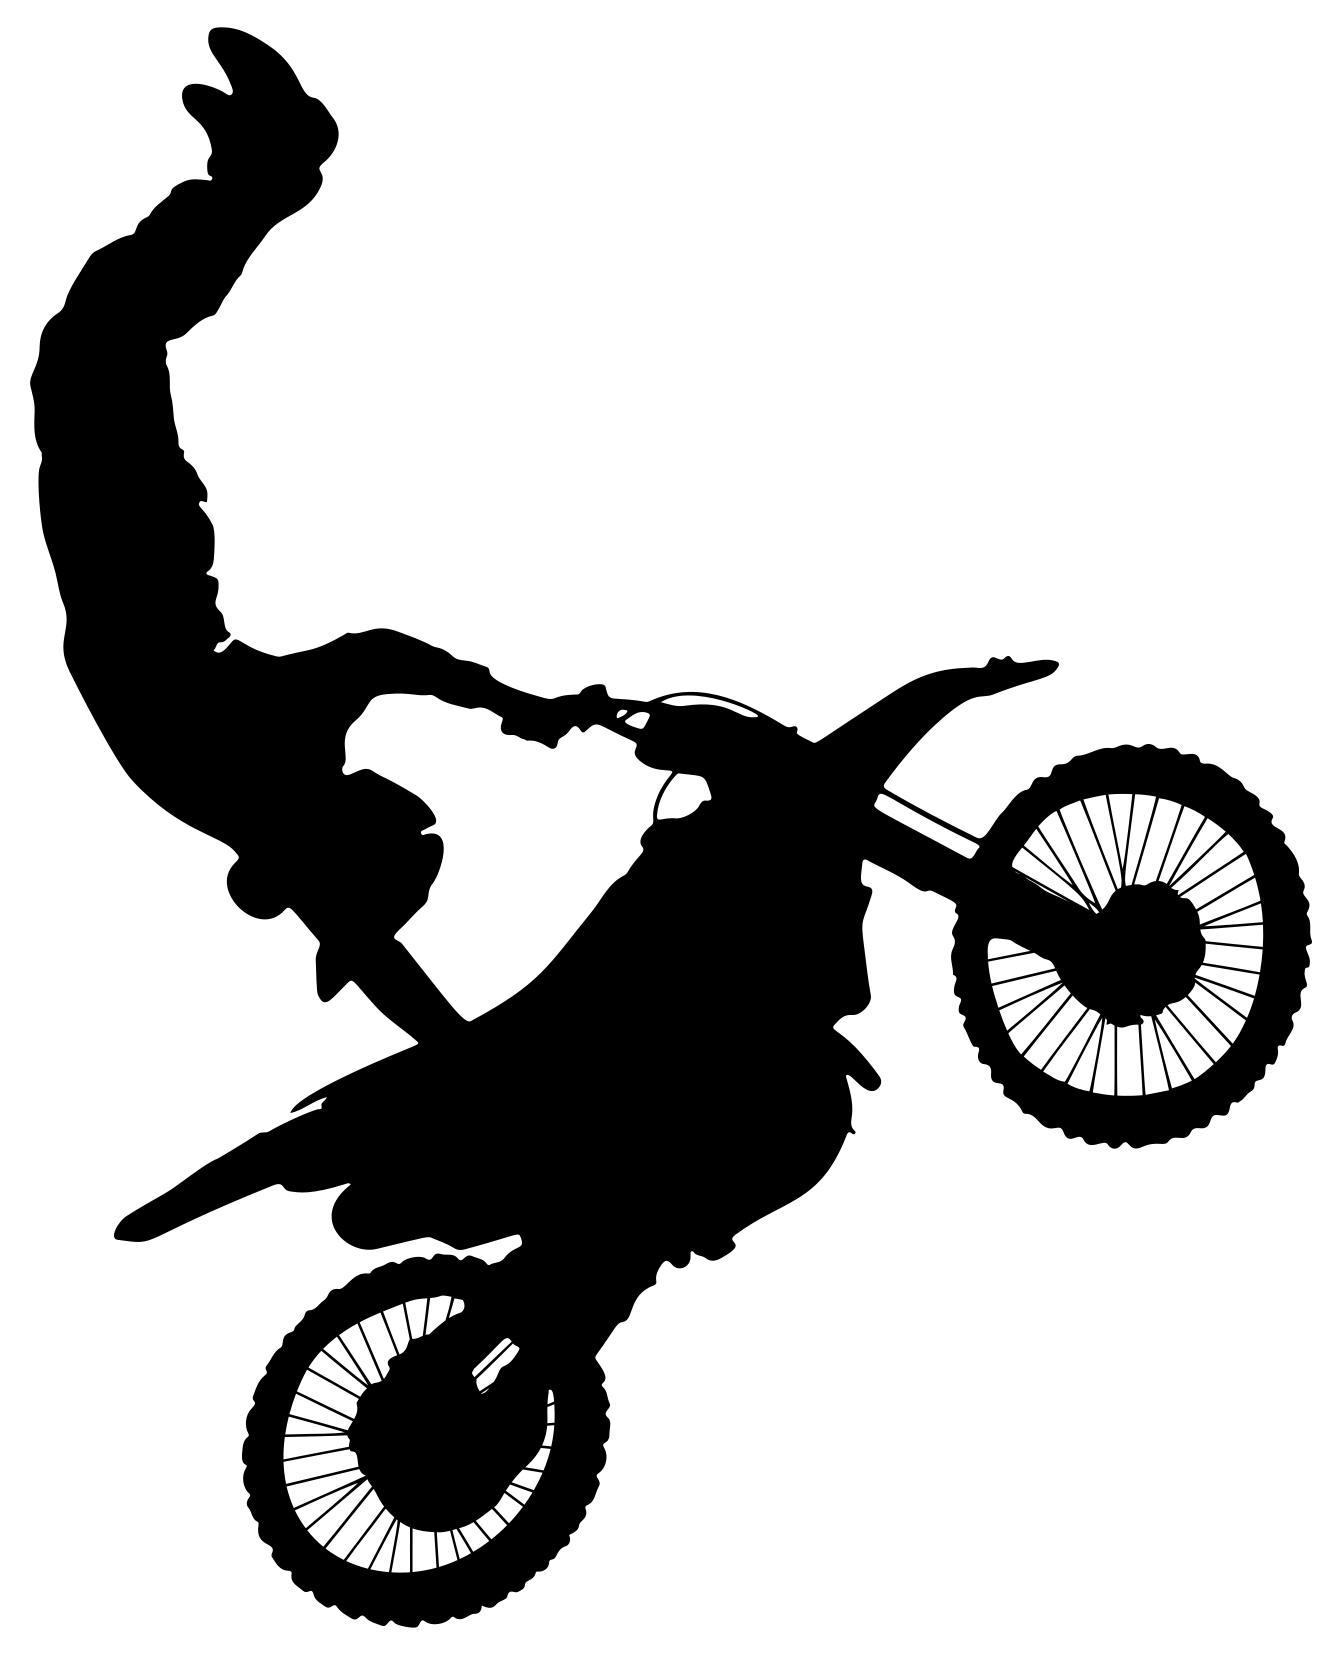 List 103+ Pictures Black And White Dirt Bike Pictures Full HD, 2k, 4k ...